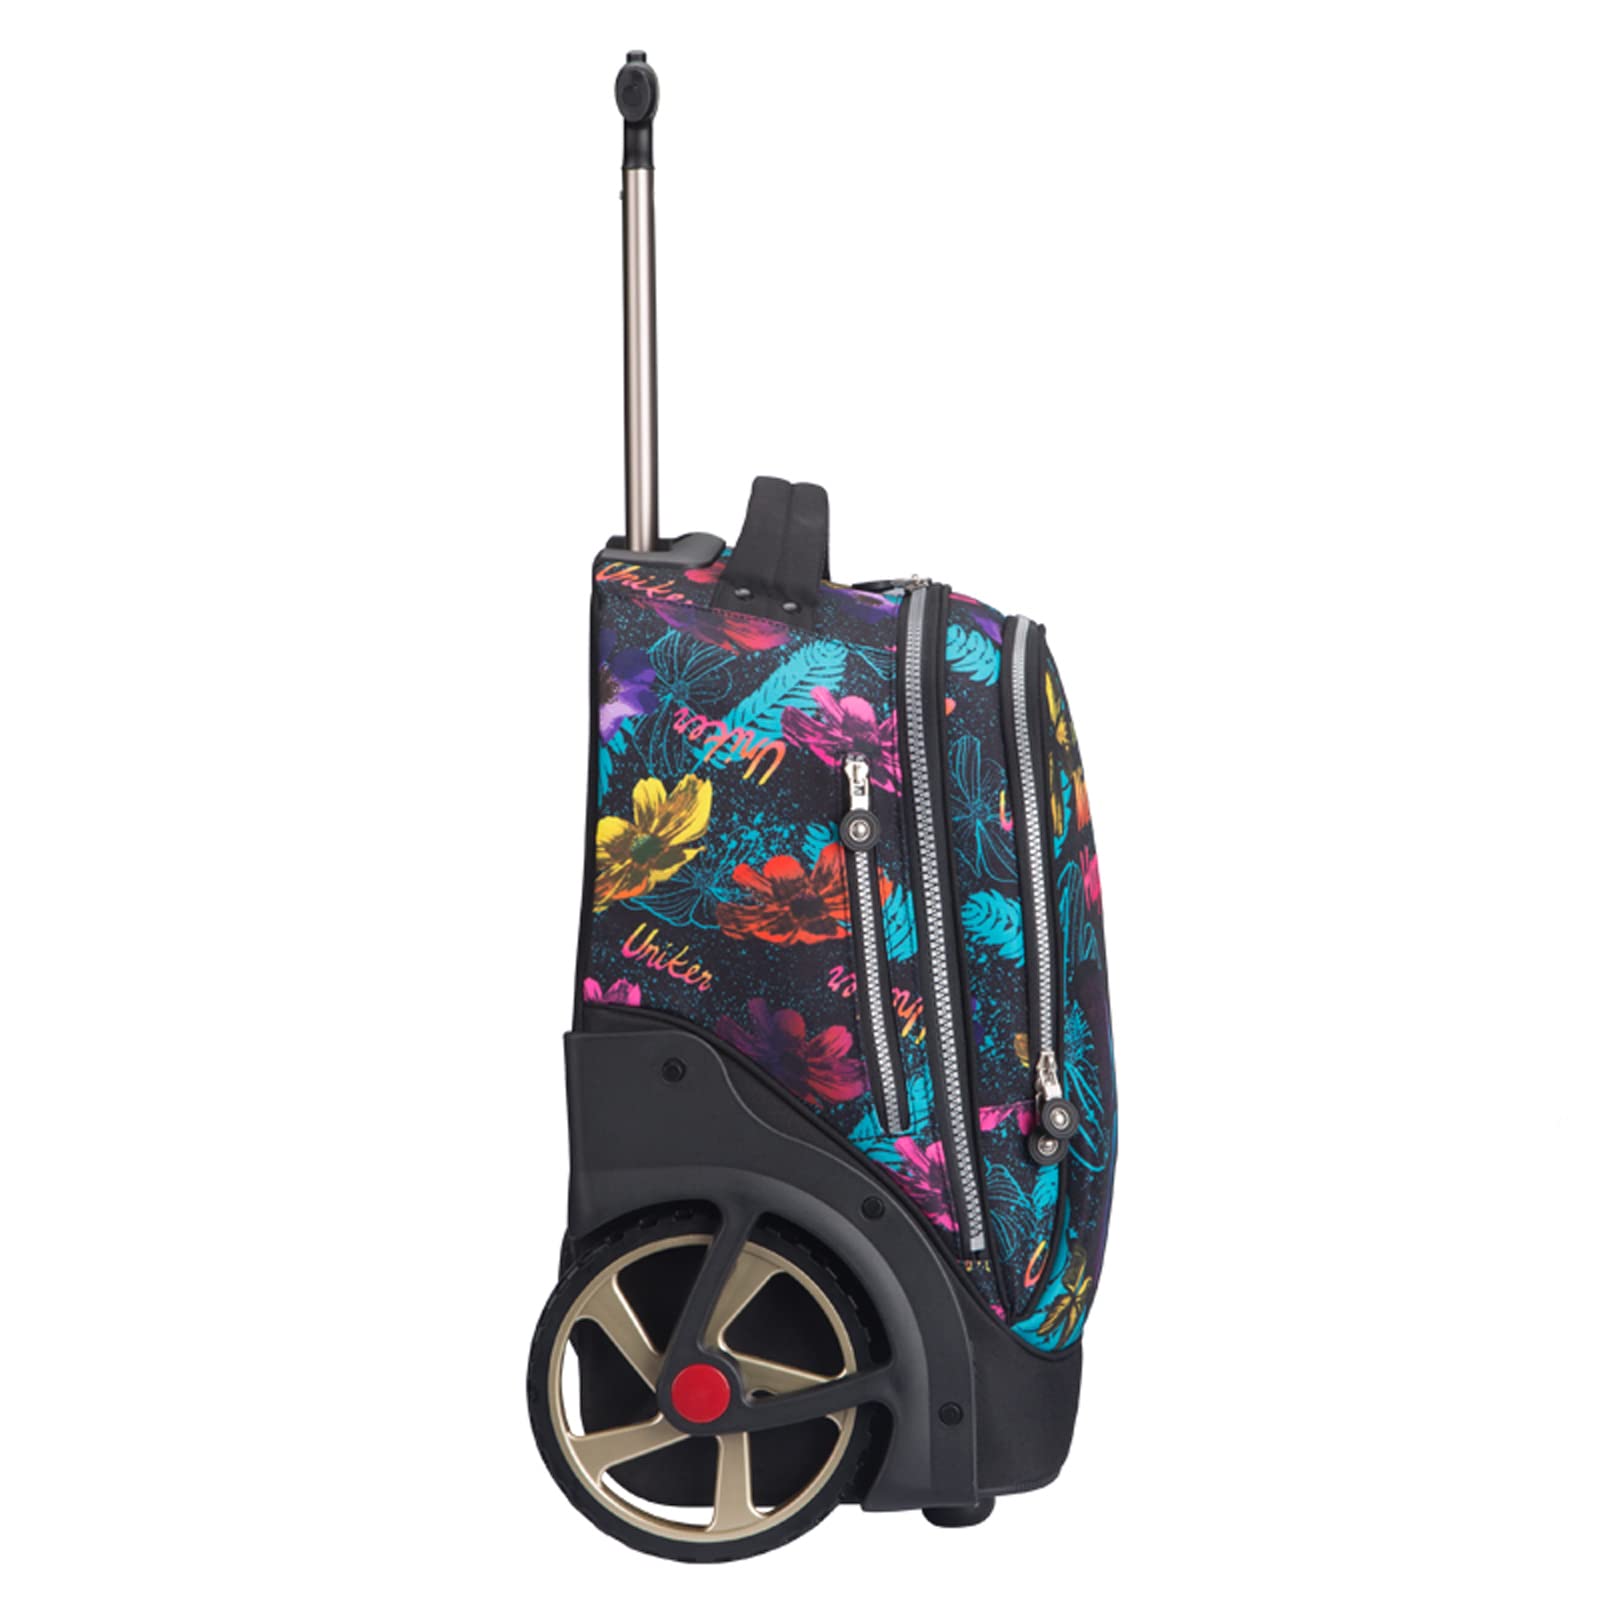 UNIKER Rolling Laptop Bag for 14 Inch Laptop with Discoloration Pattern,Roller Bookbag,Wheeled Computer Bag,Wheeled Bookbag High School,Trolley School Bag,Butterfly